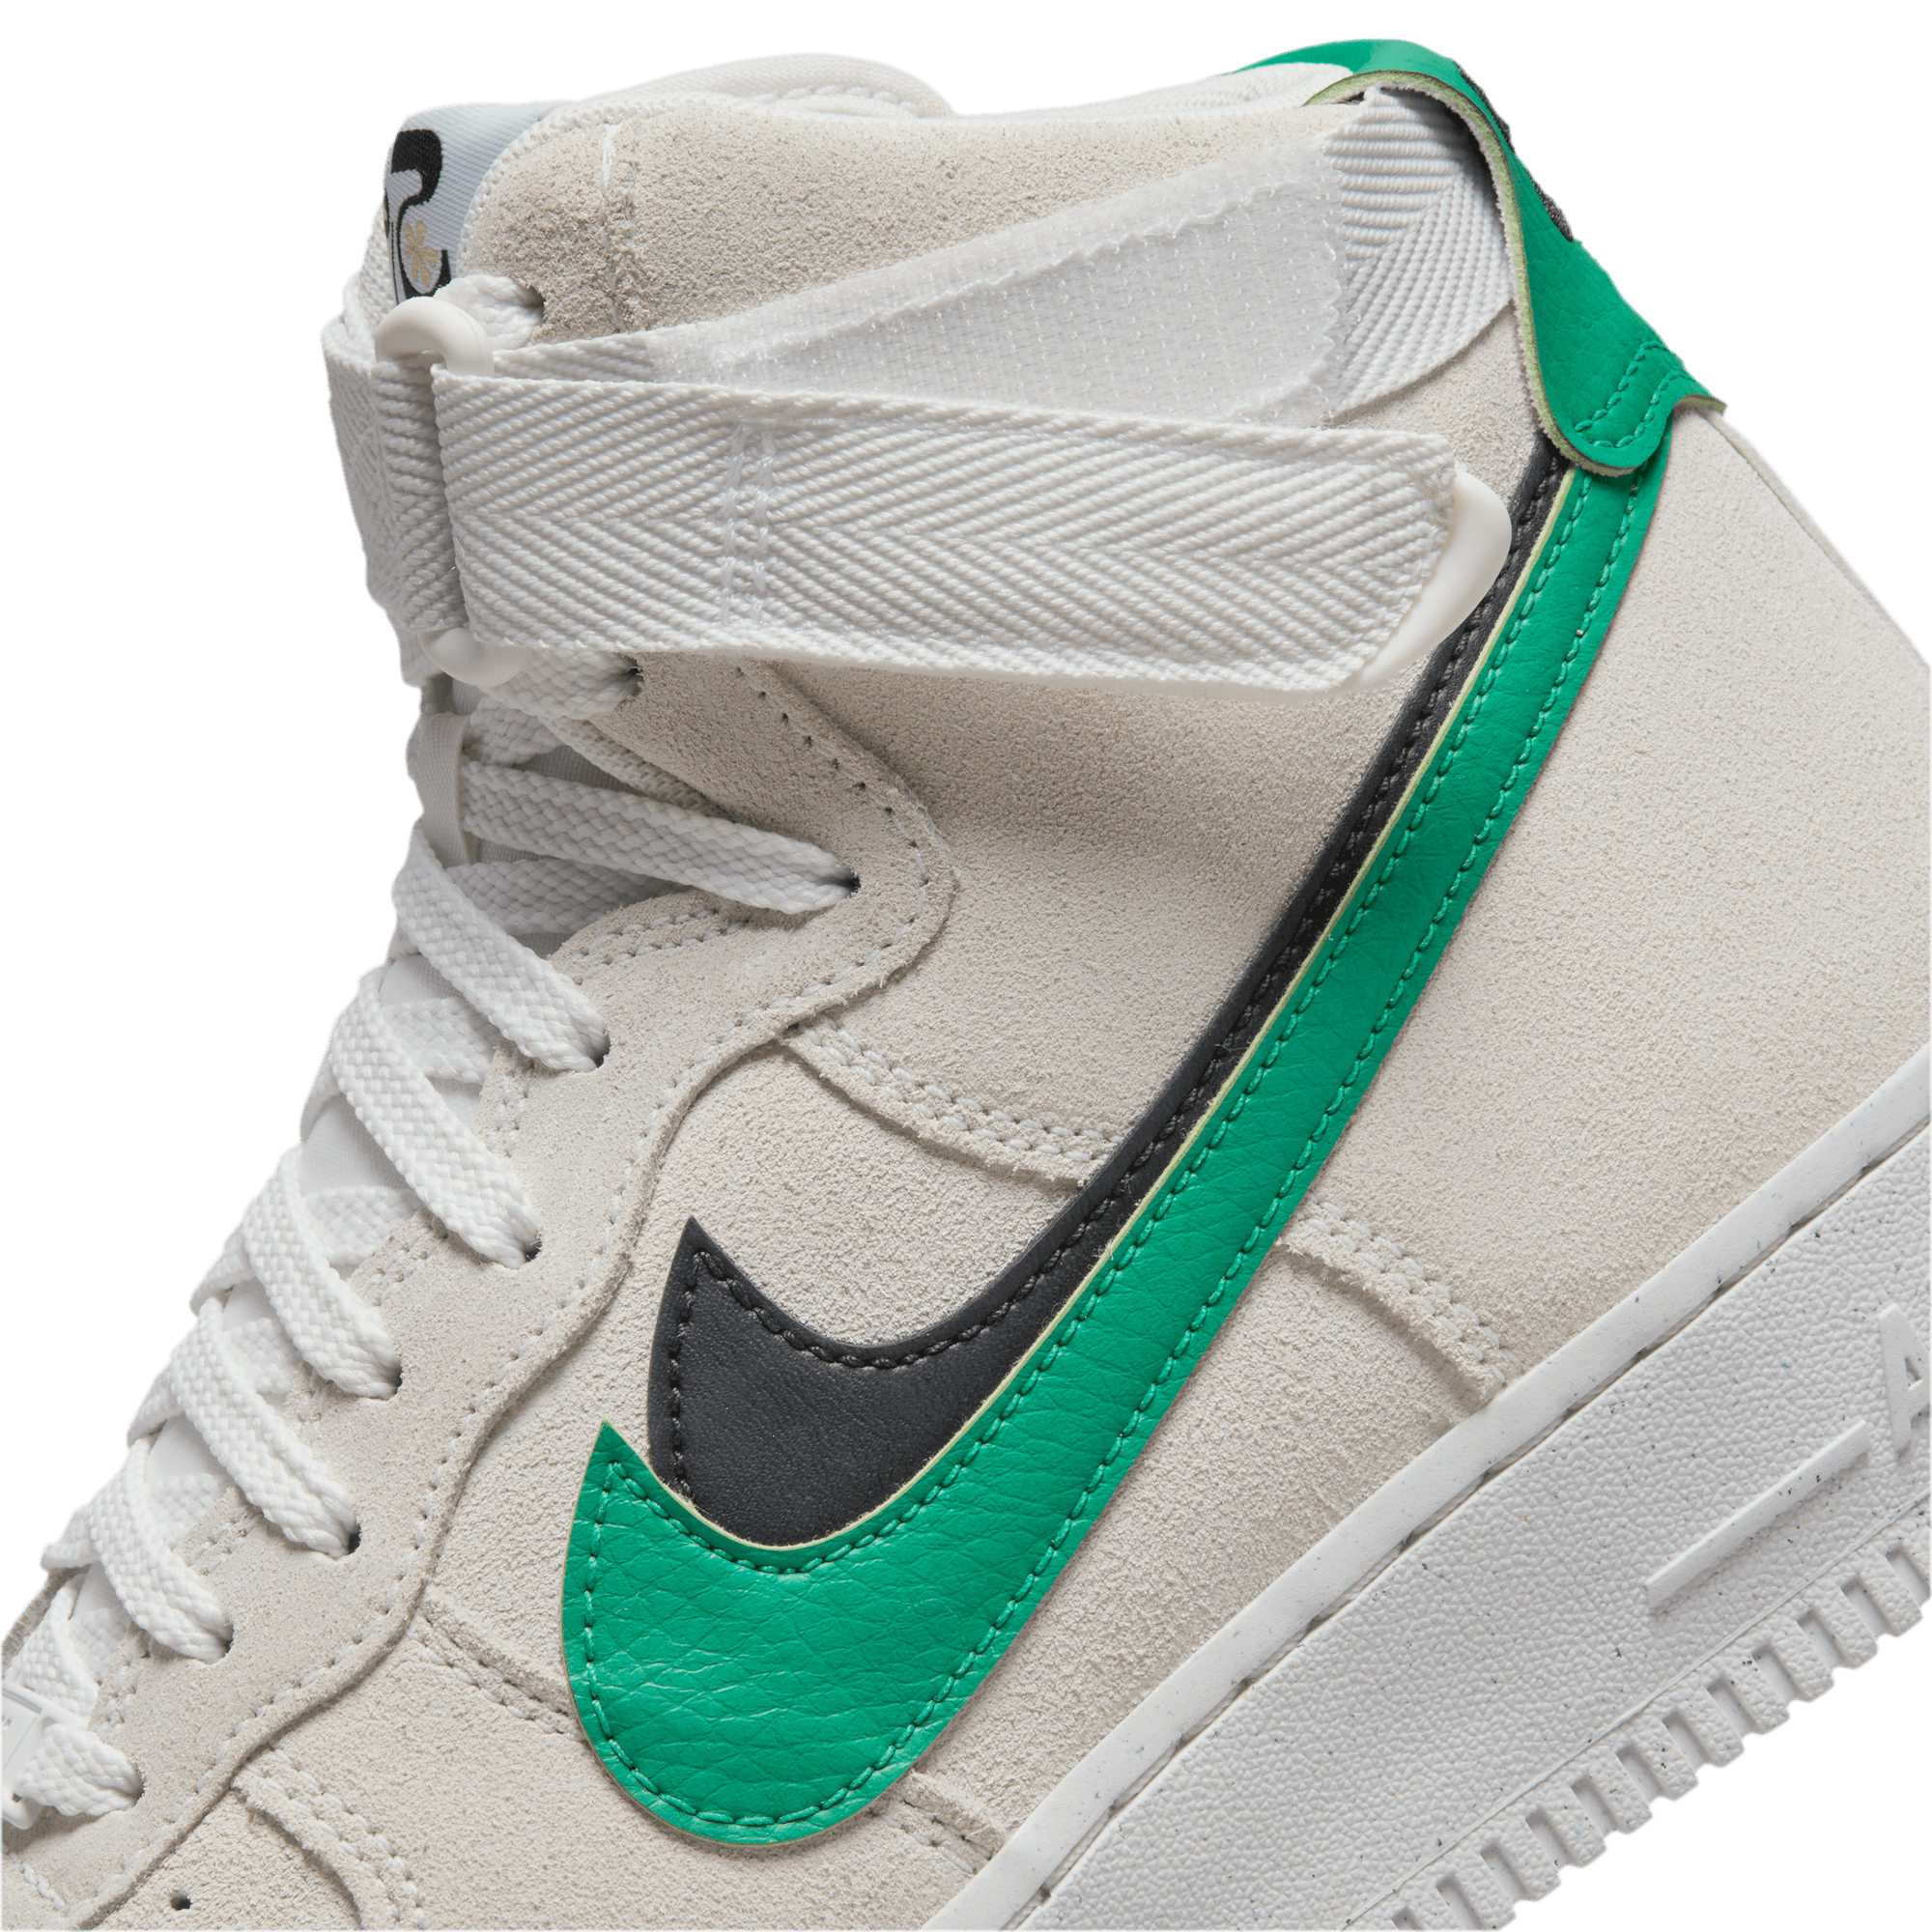 Nike Women's Air Force 1 High SE High-Top Sneakers